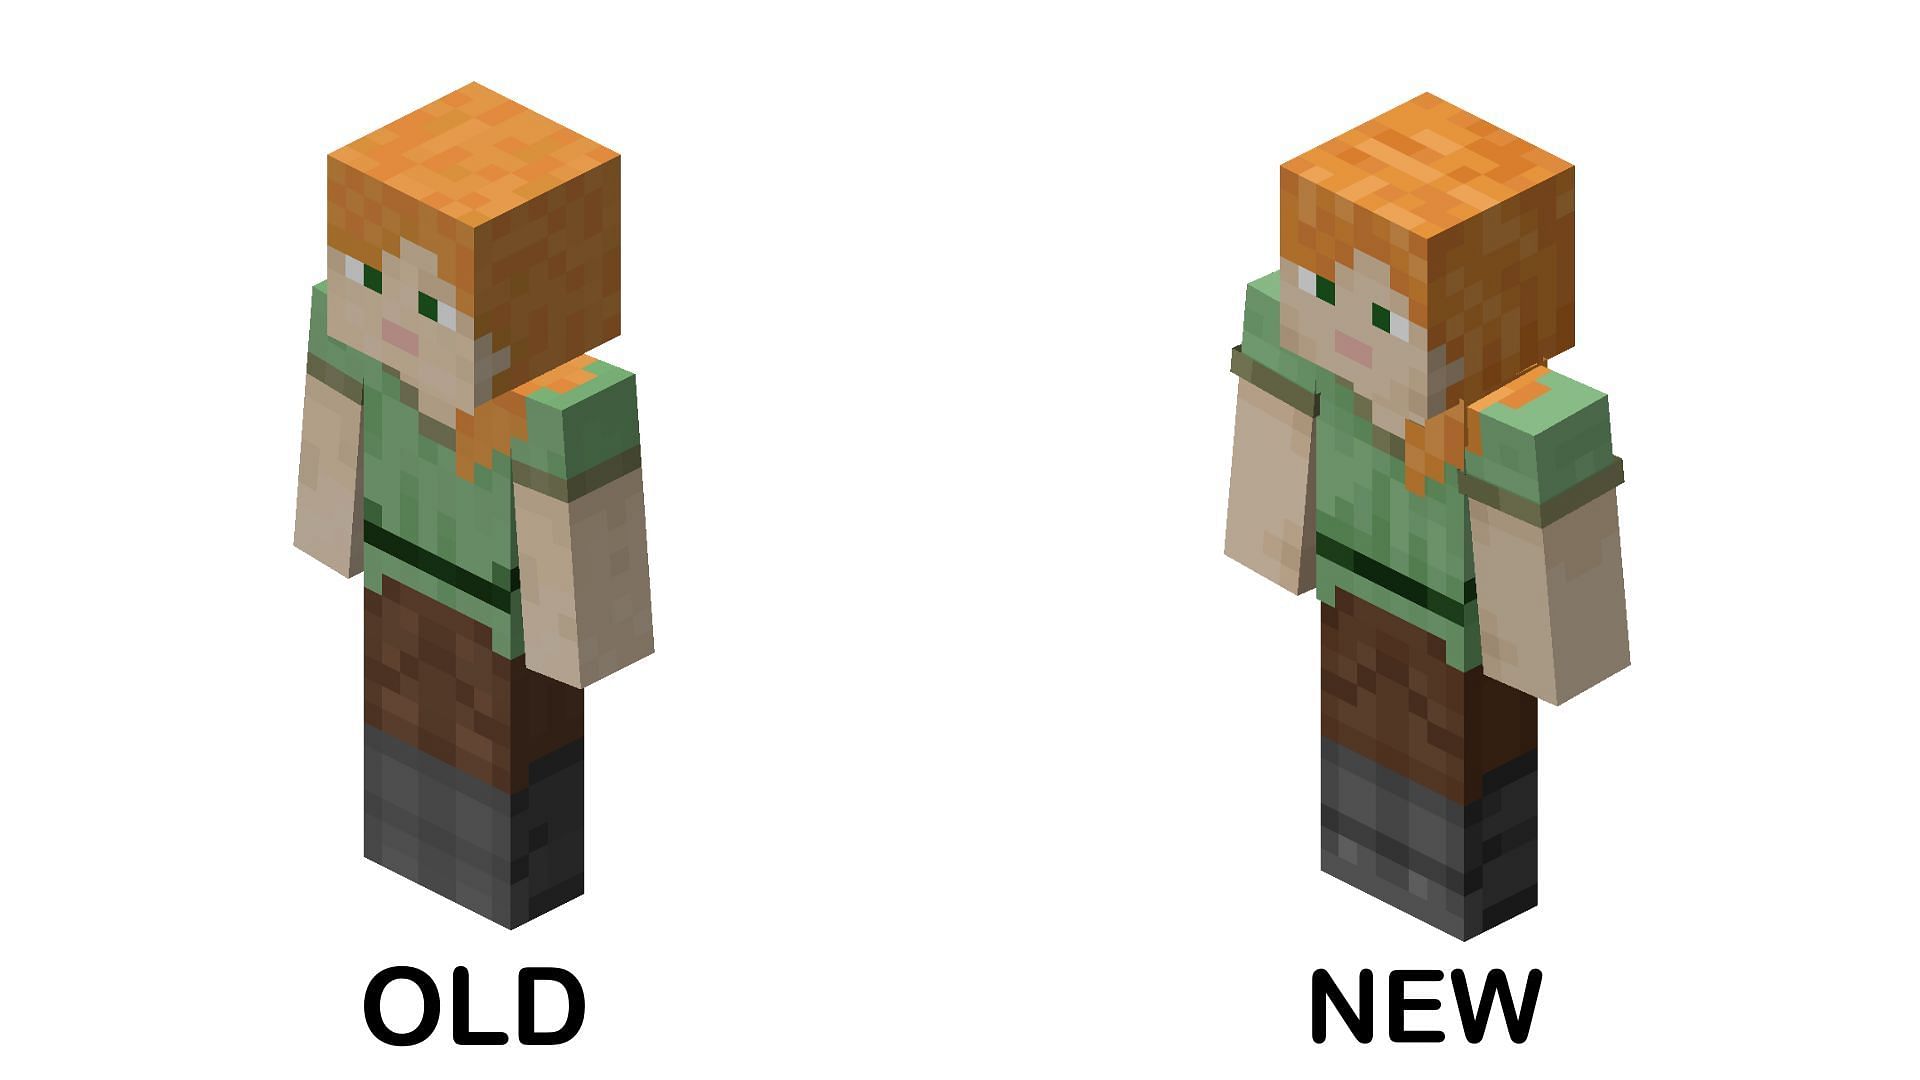 What are the changes in new Steve and Alex skins in Minecraft?